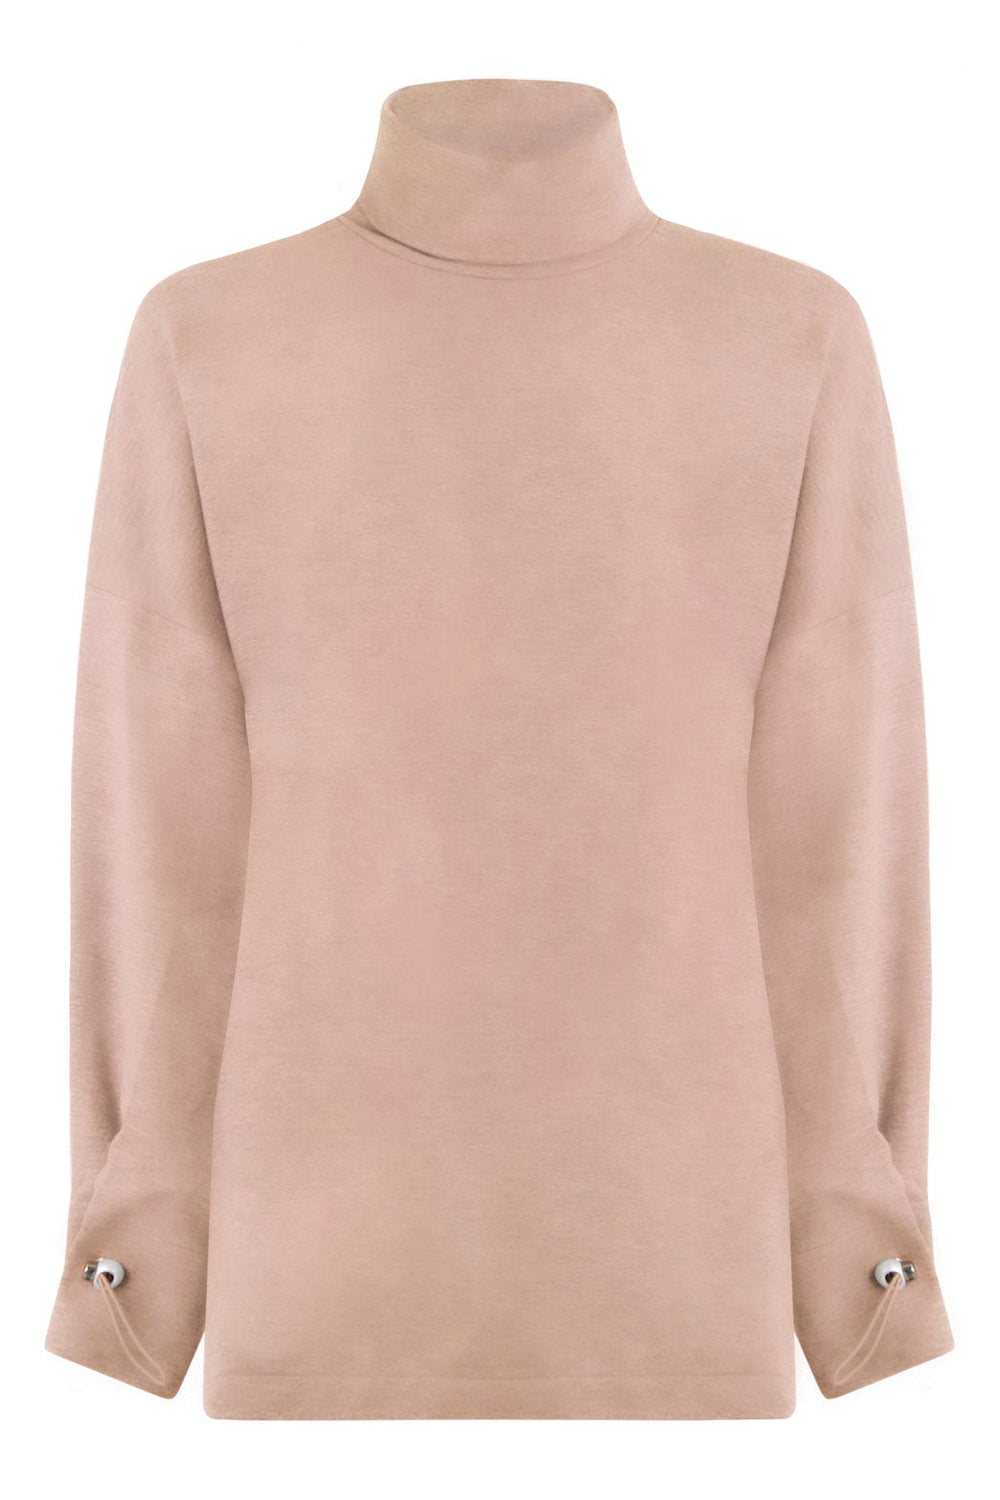 MOTHER OF PEARL TOPS AMINA TURTLENECK TOP L/S STONE